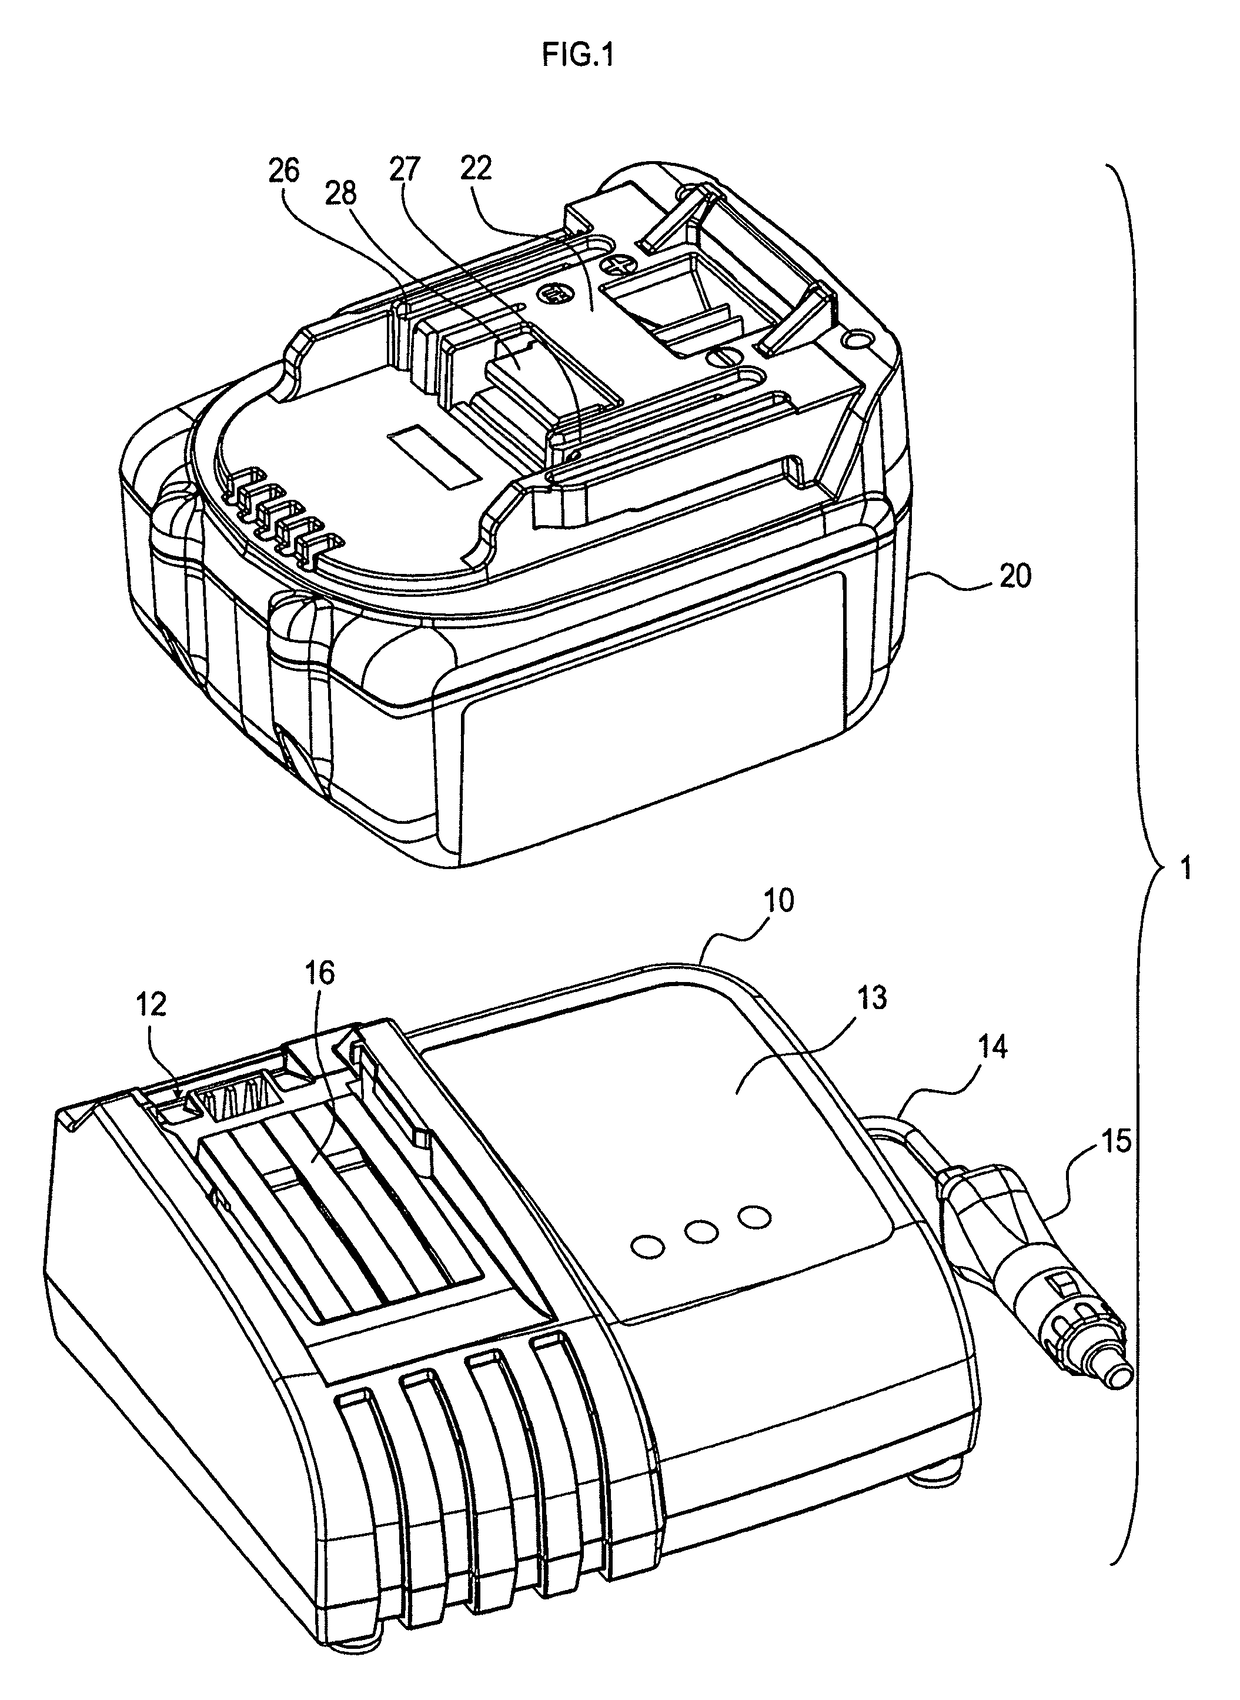 Charging system including a battery pack that outputs a stop request signal and a charging apparatus that stops power conversion in receipt of the stop request signal